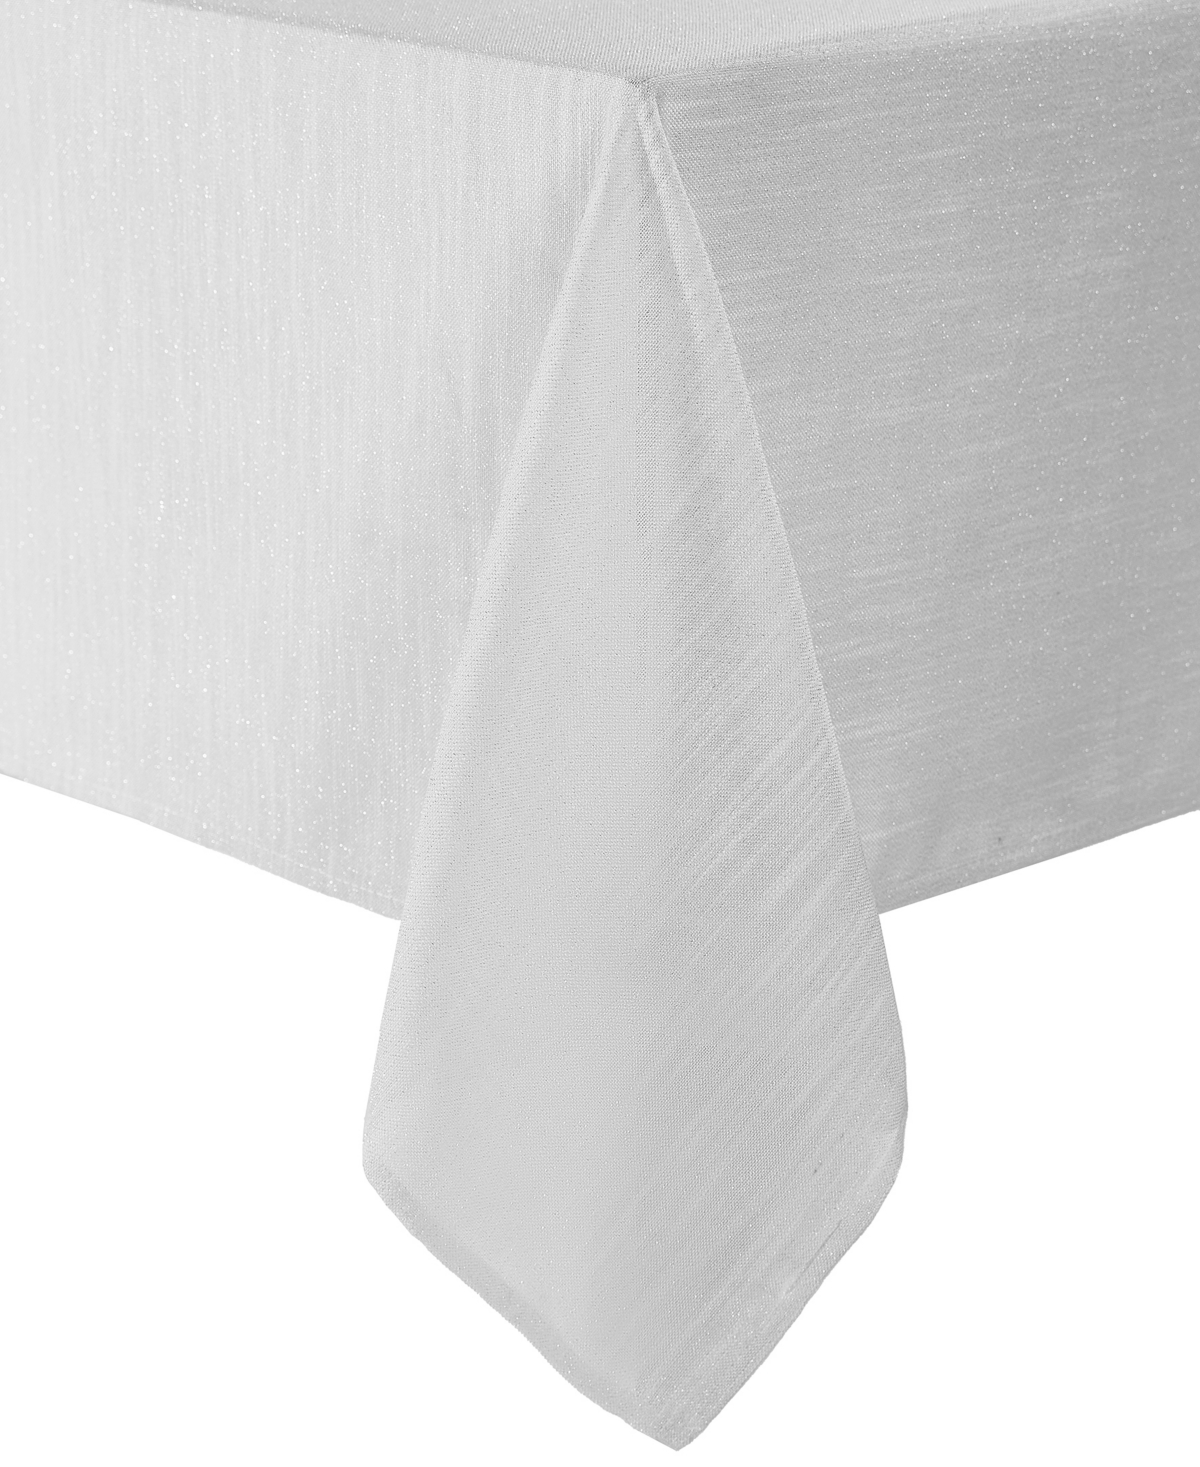 Laura Ashley Arabesque Tablecloth, 120" L X 60" W, Service For 6 In White